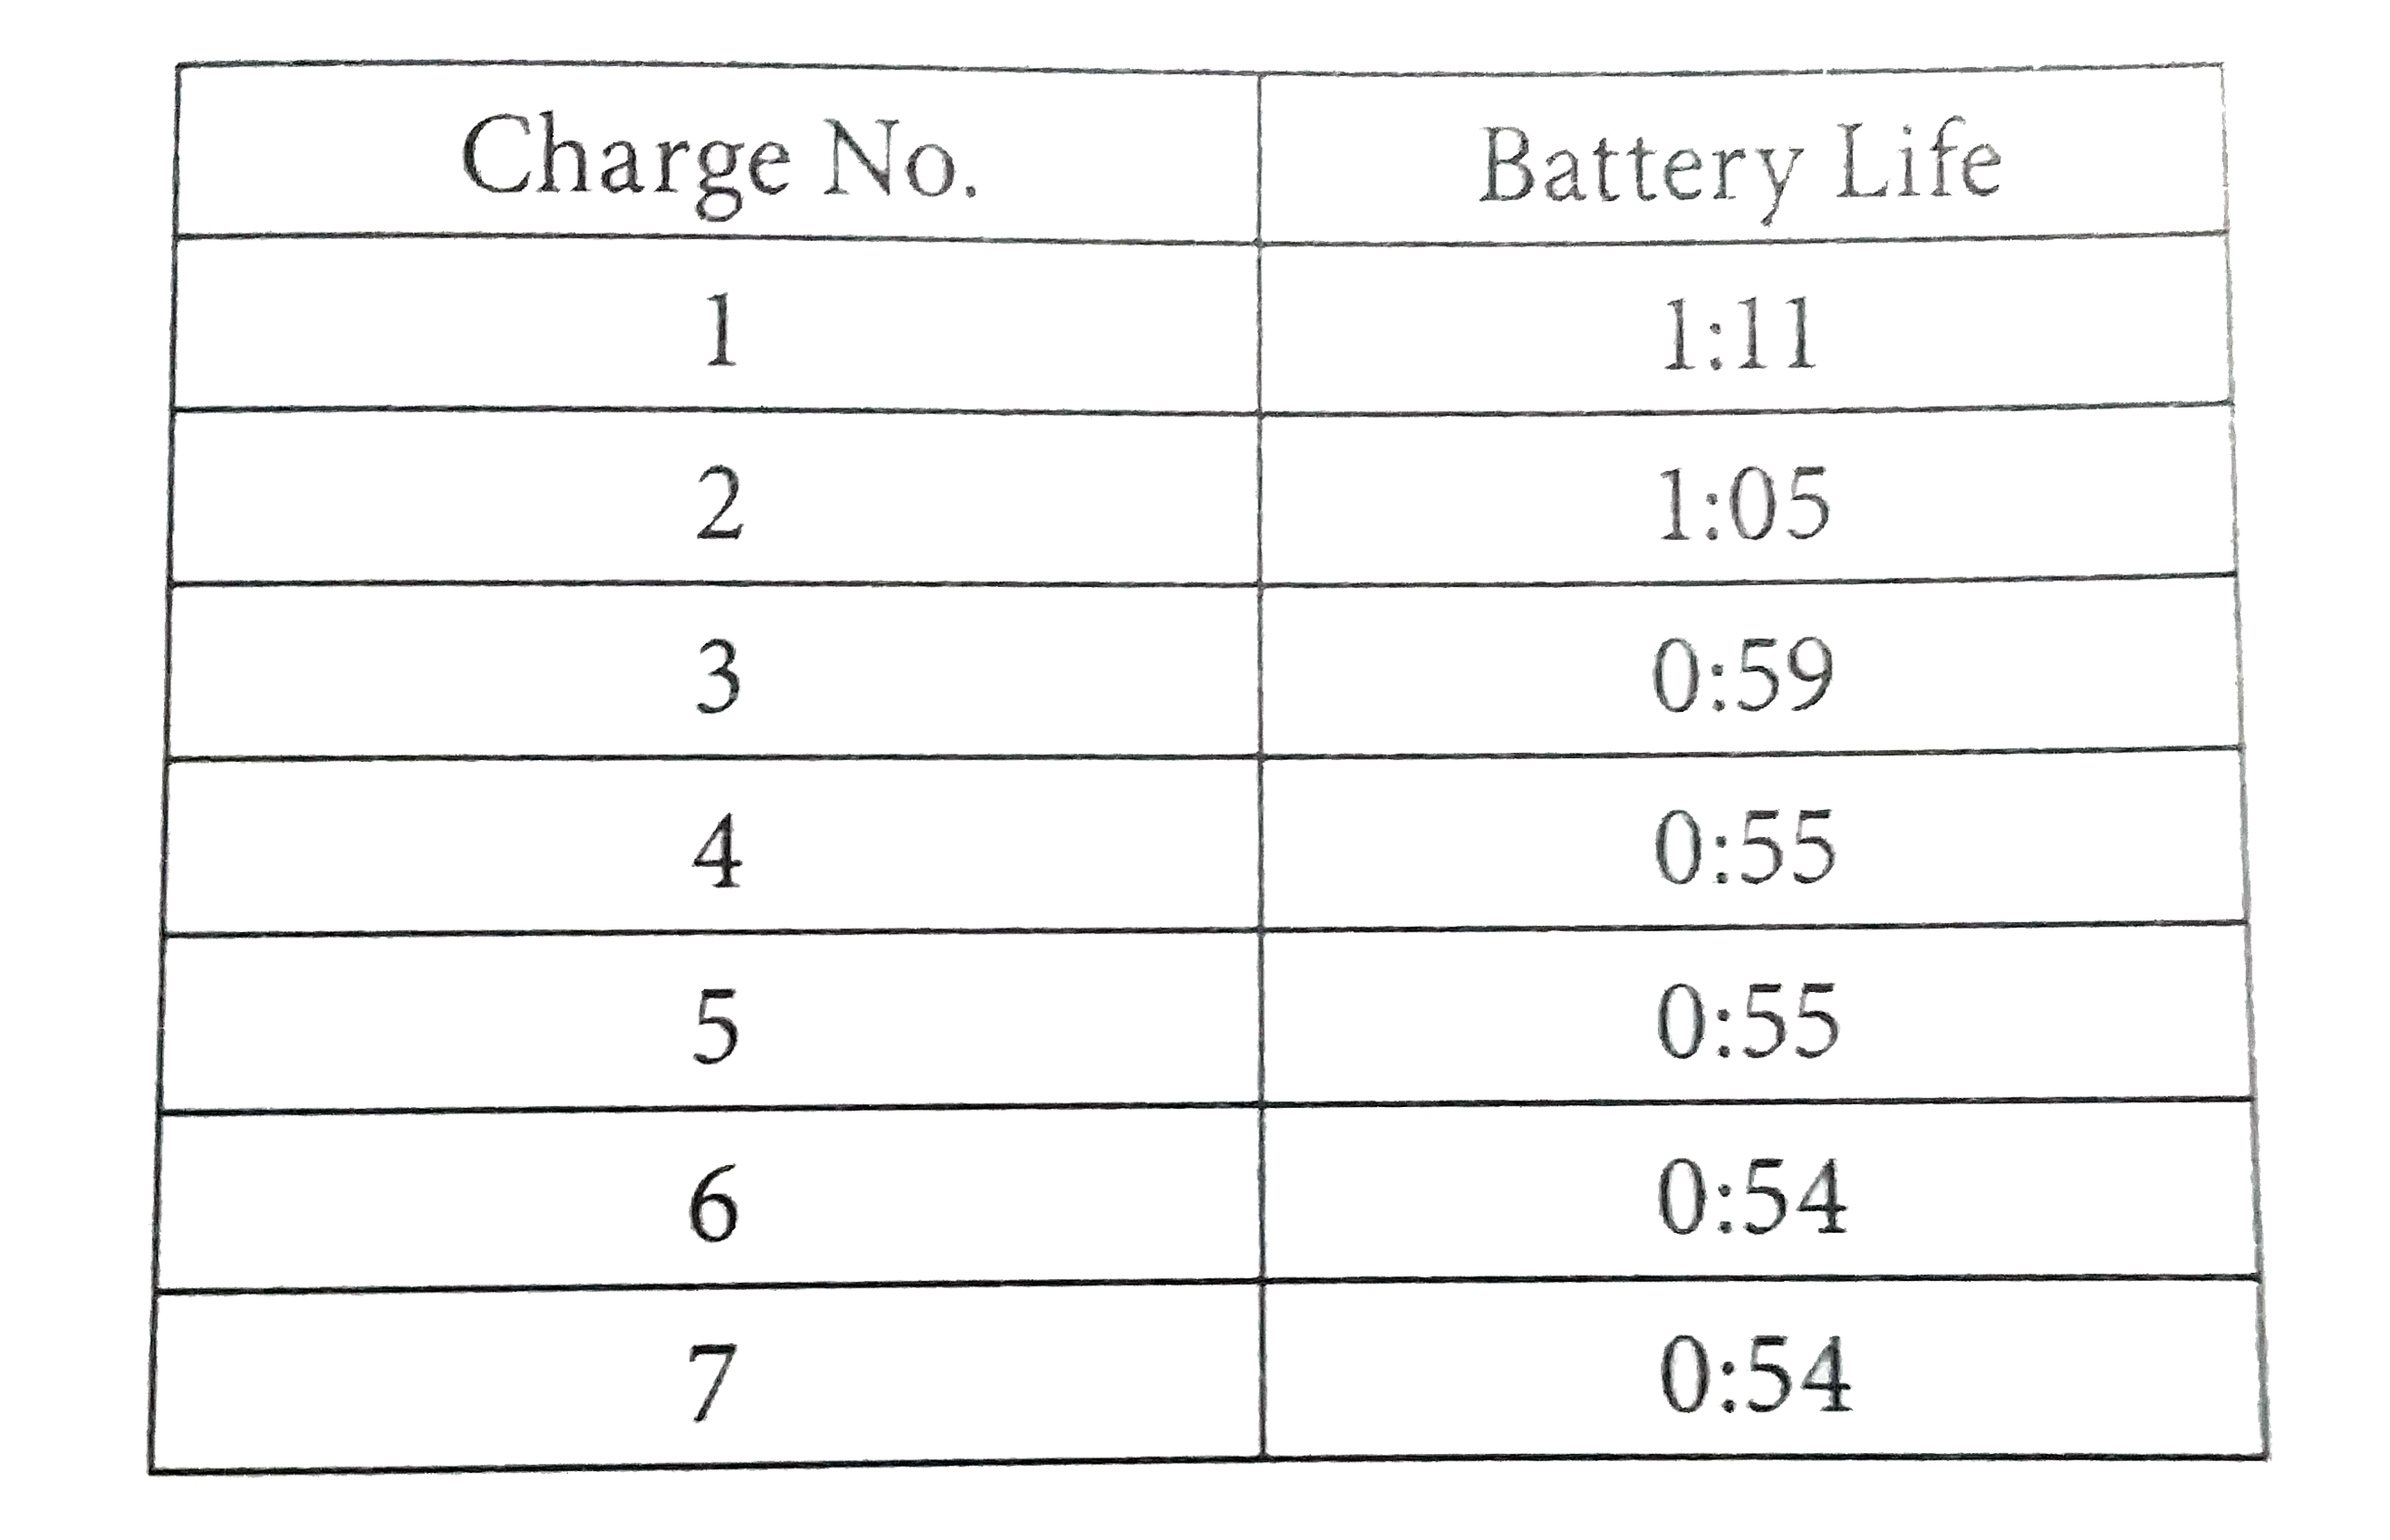 A toy drone is opened and charged to full battery life. The table above shows the duration of the battery life in hours and minutes between charges. What is the average battery life for the first five charges?